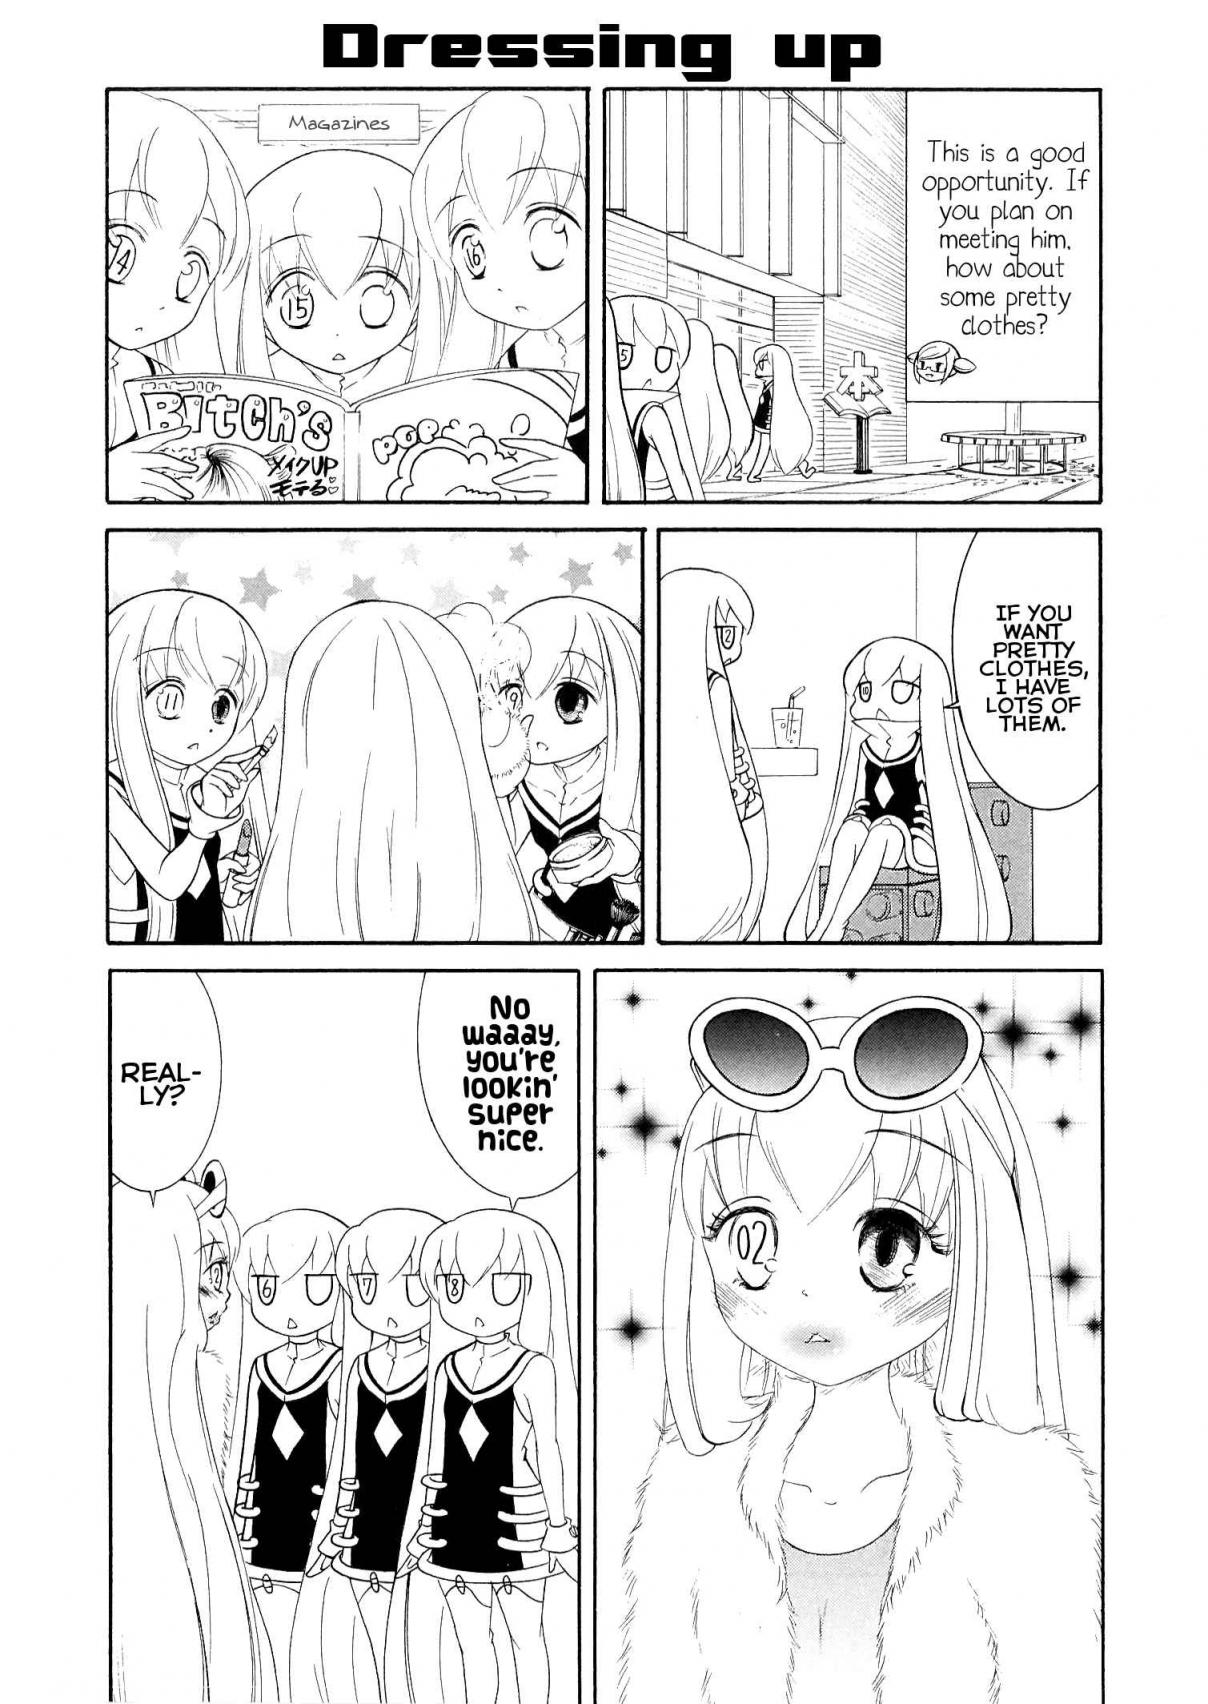 Number Girl Vol. 2 Ch. 20